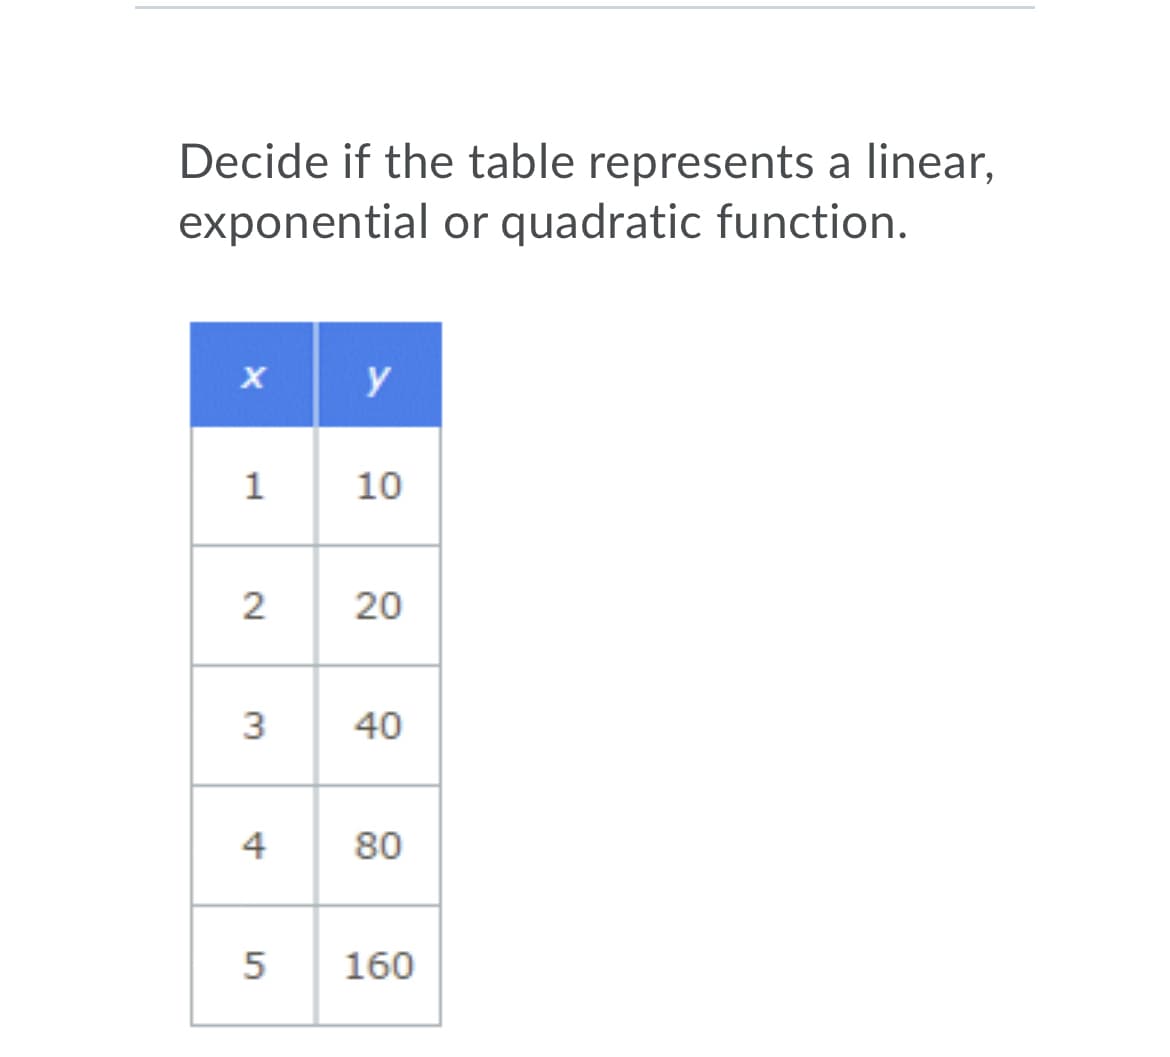 Decide if the table represents a linear,
exponential or quadratic function.
y
1
10
2
20
3
40
4
80
5
160
